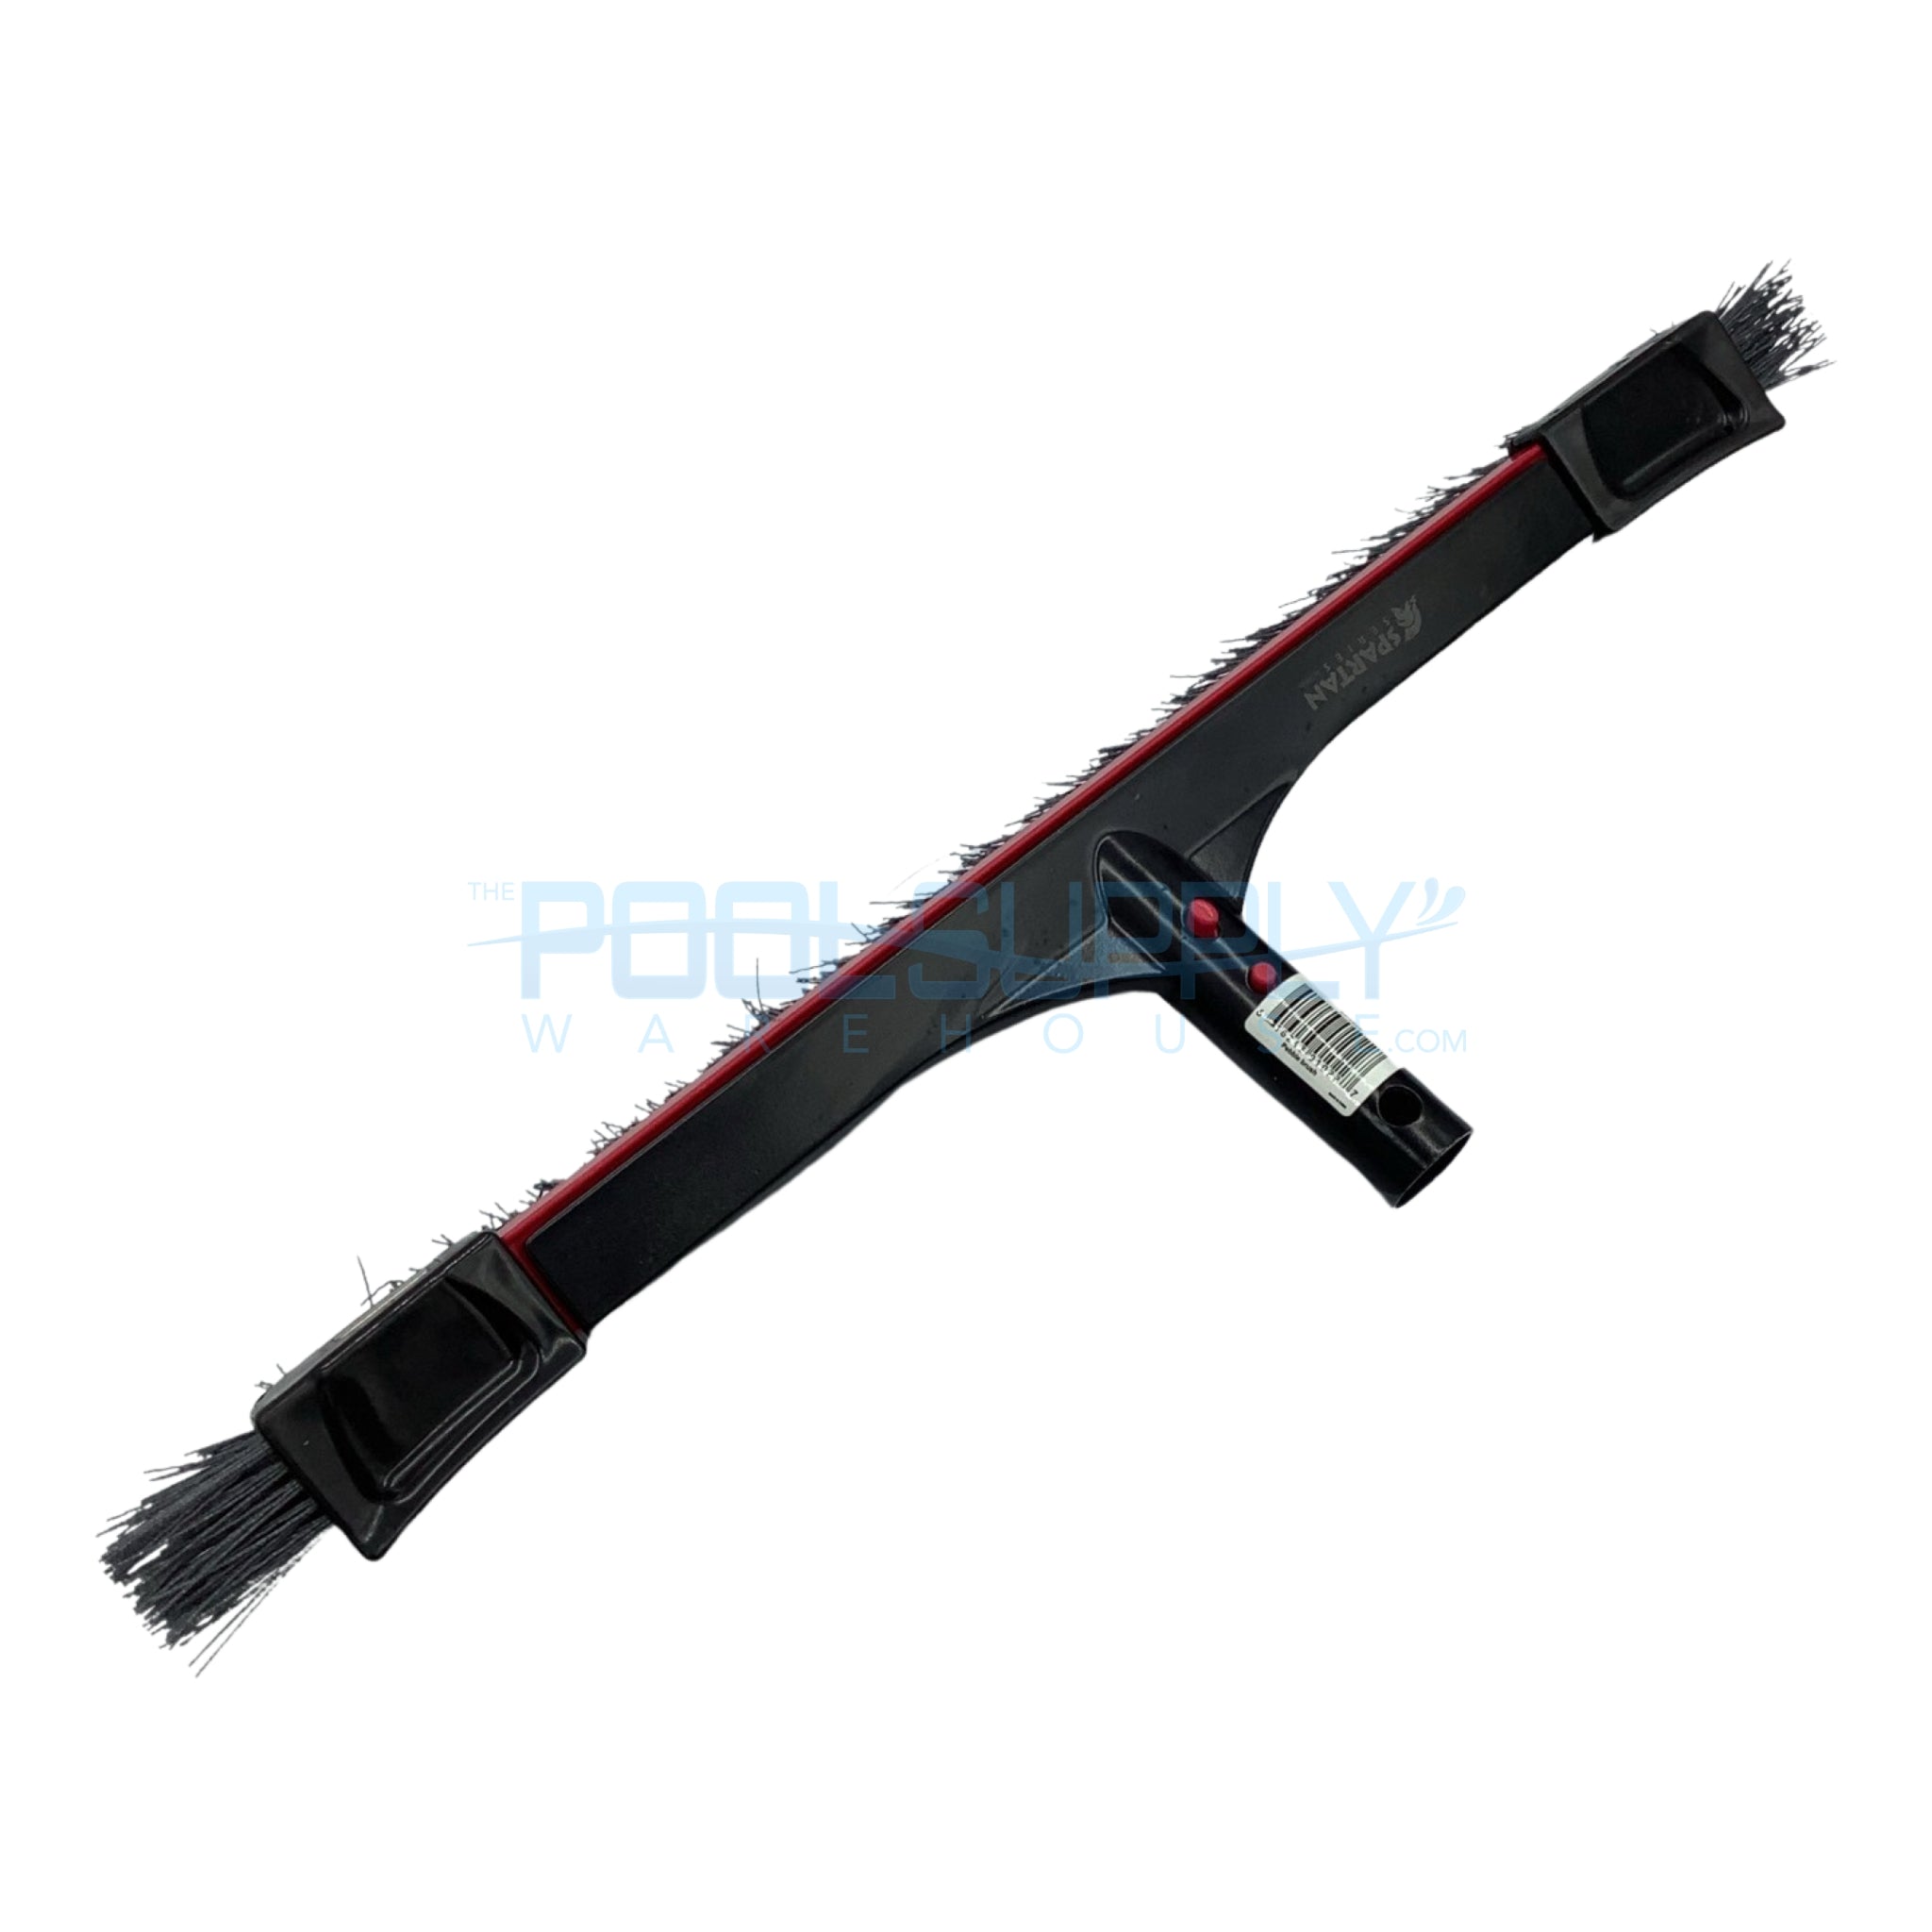 Skimlite 22" Spartan All Grit Brush - SP1022 - The Pool Supply Warehouse